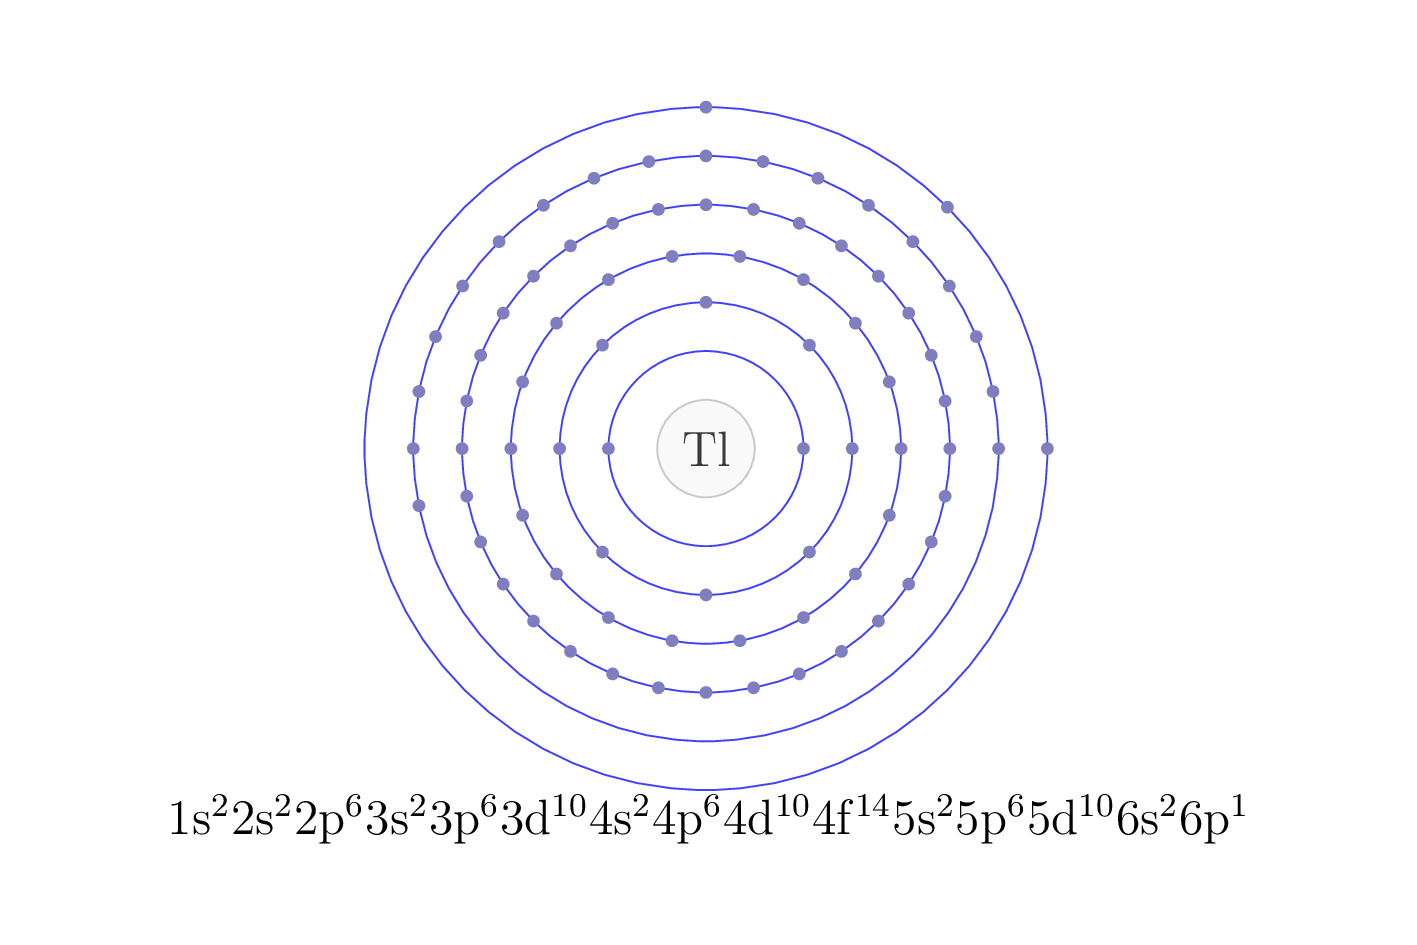 electron configuration of element Tl